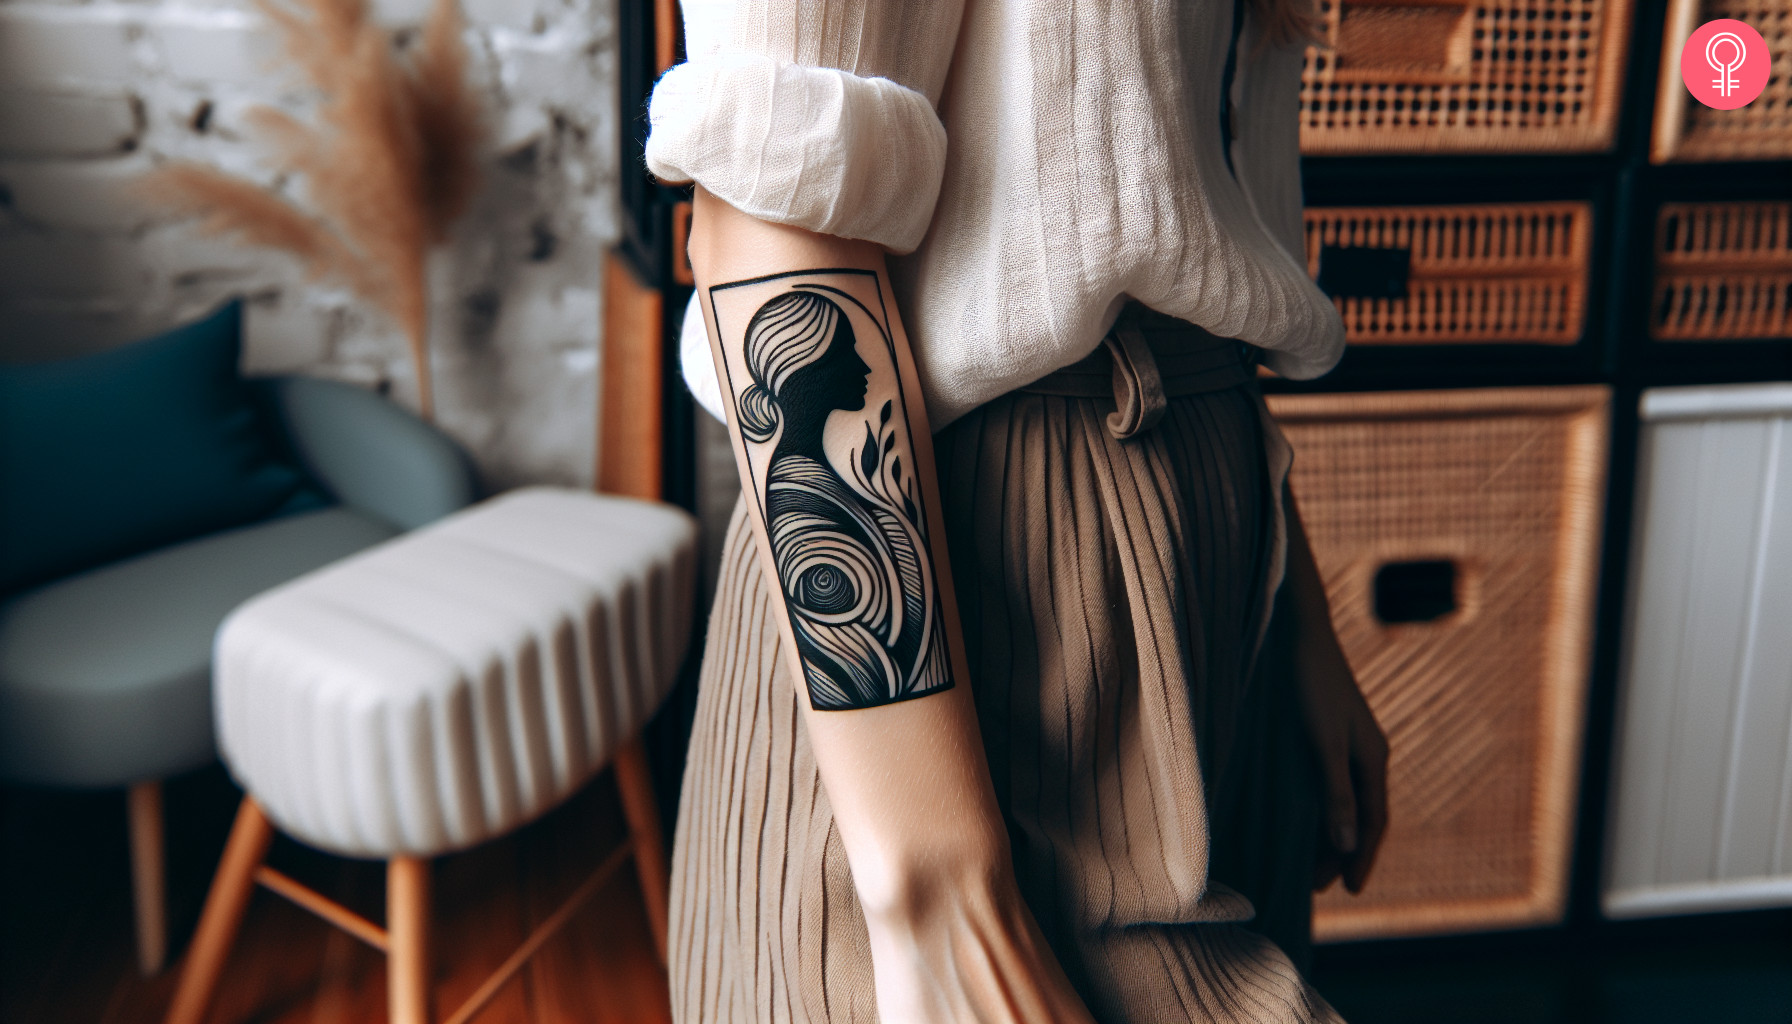 abstract woman silhouette tattoo on the arm of a woman